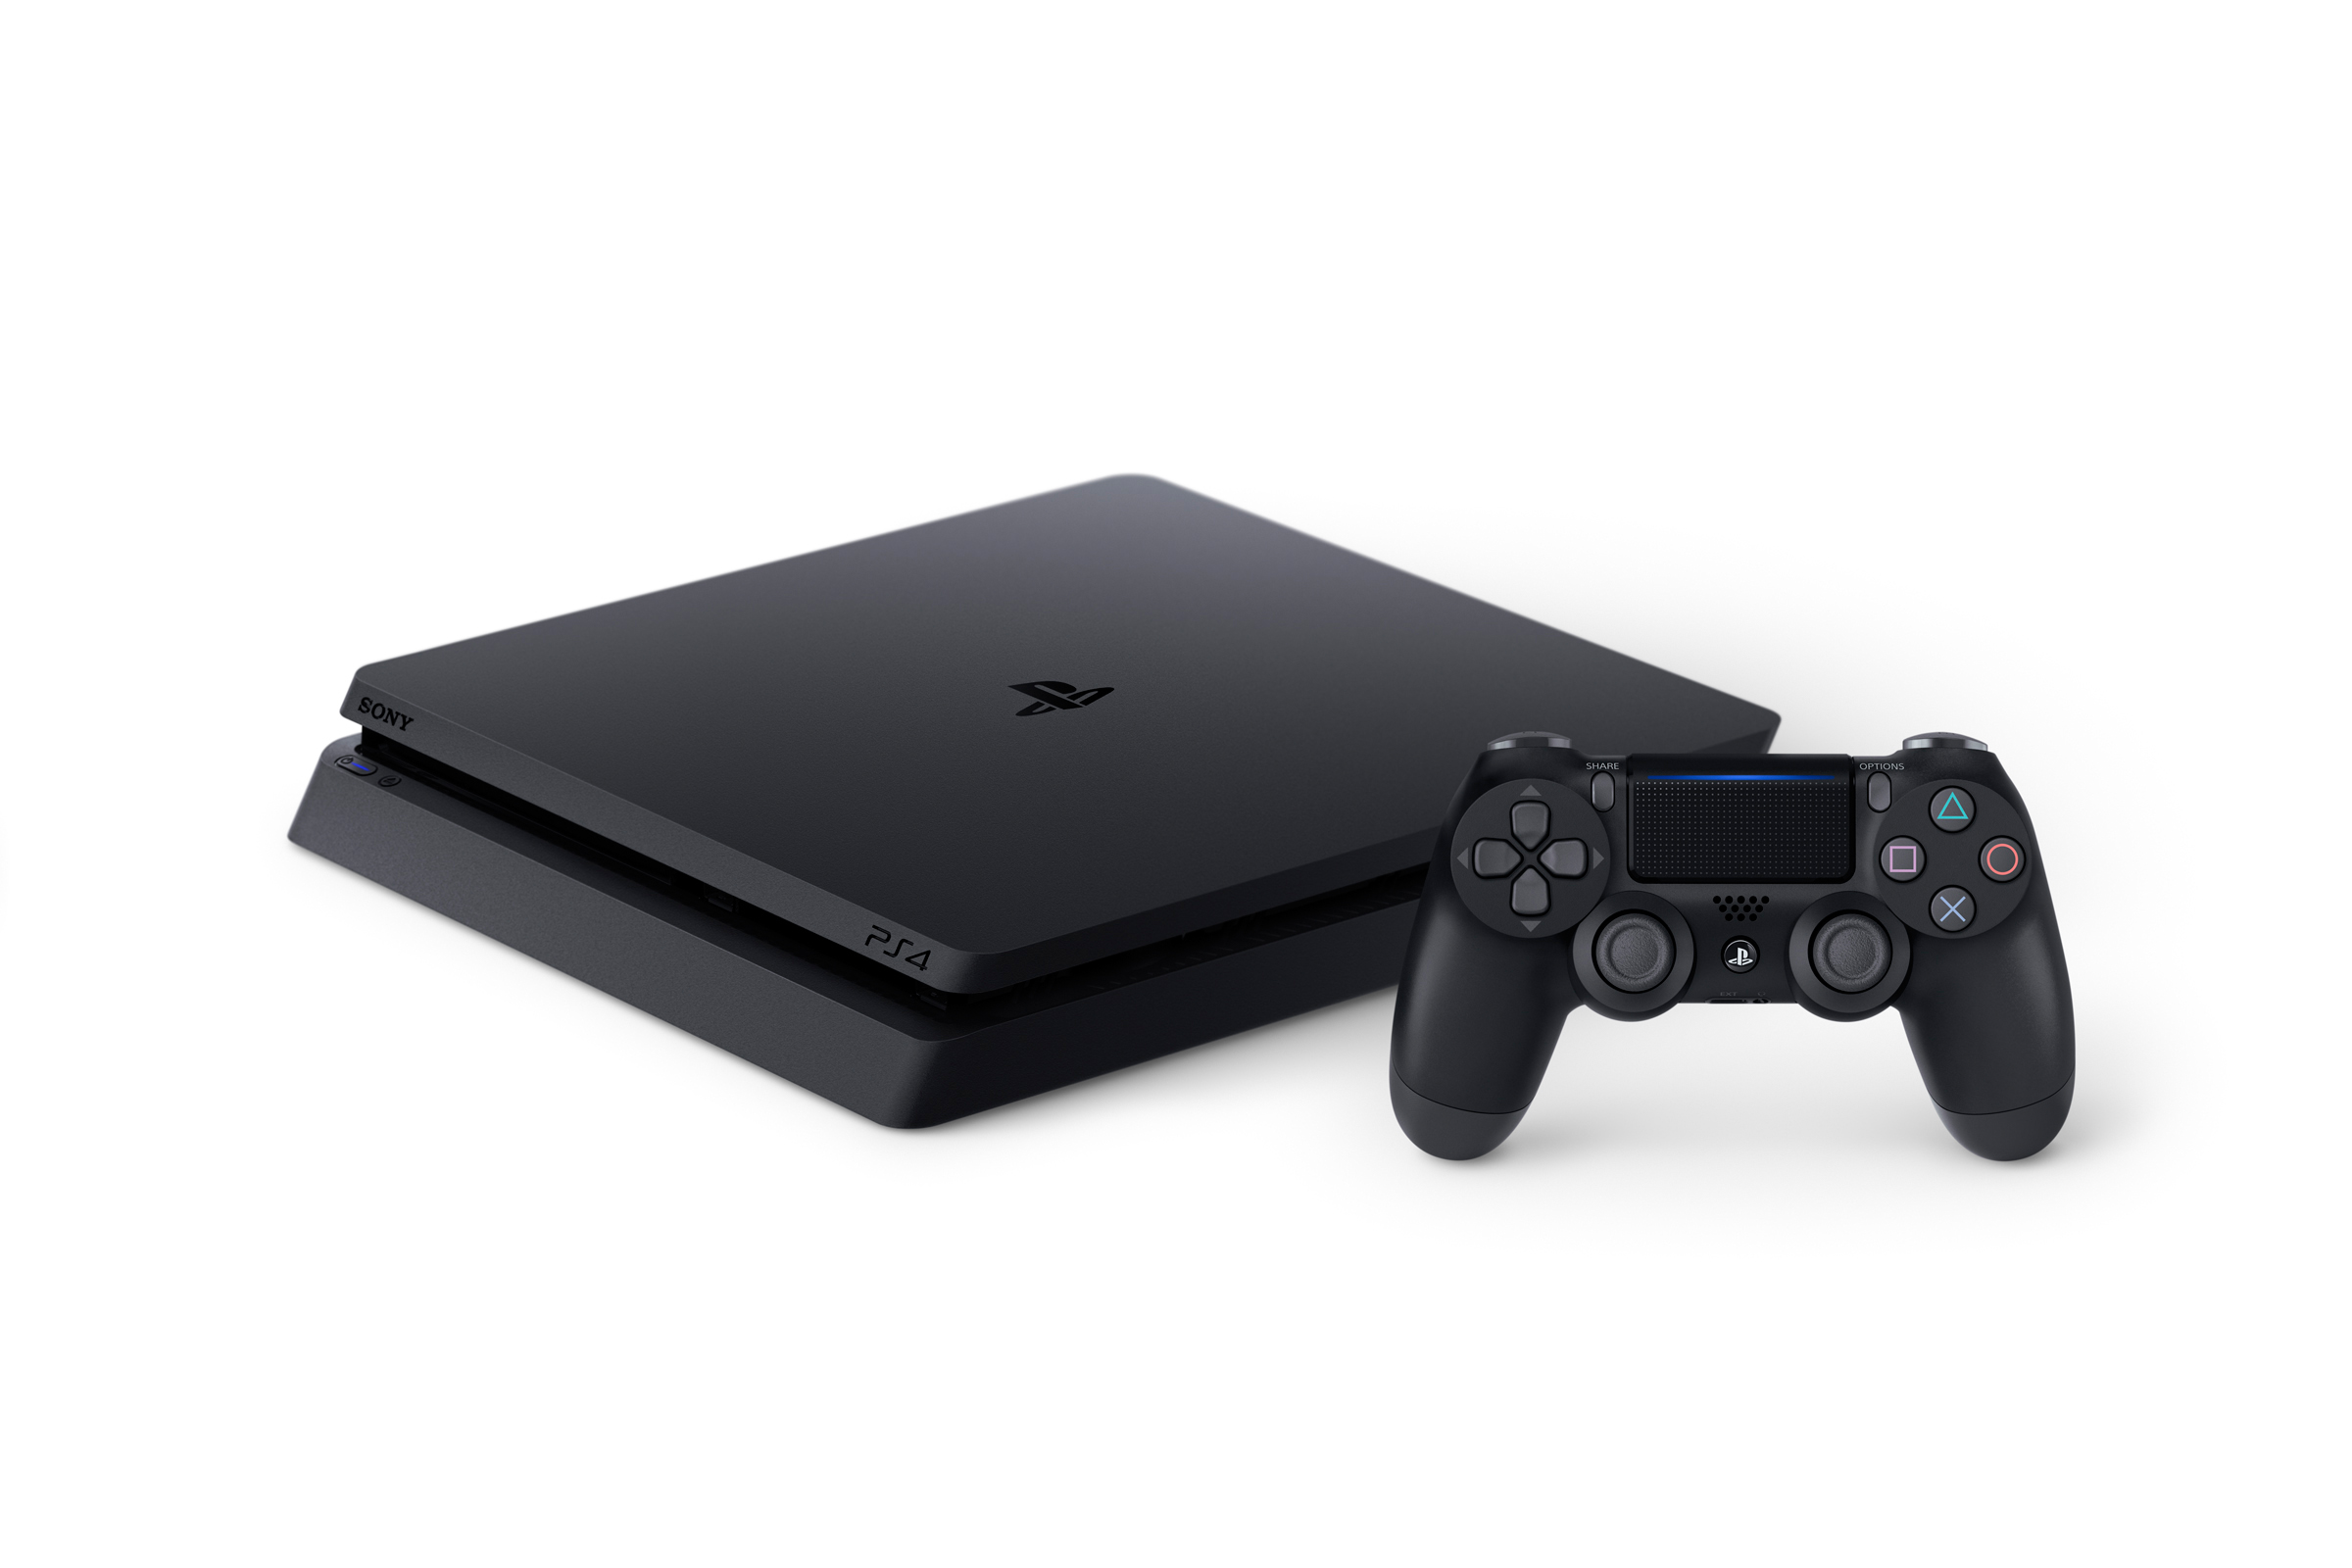 Fakultet Poesi Abe Here's the PS4 Slim Specs & Official Images